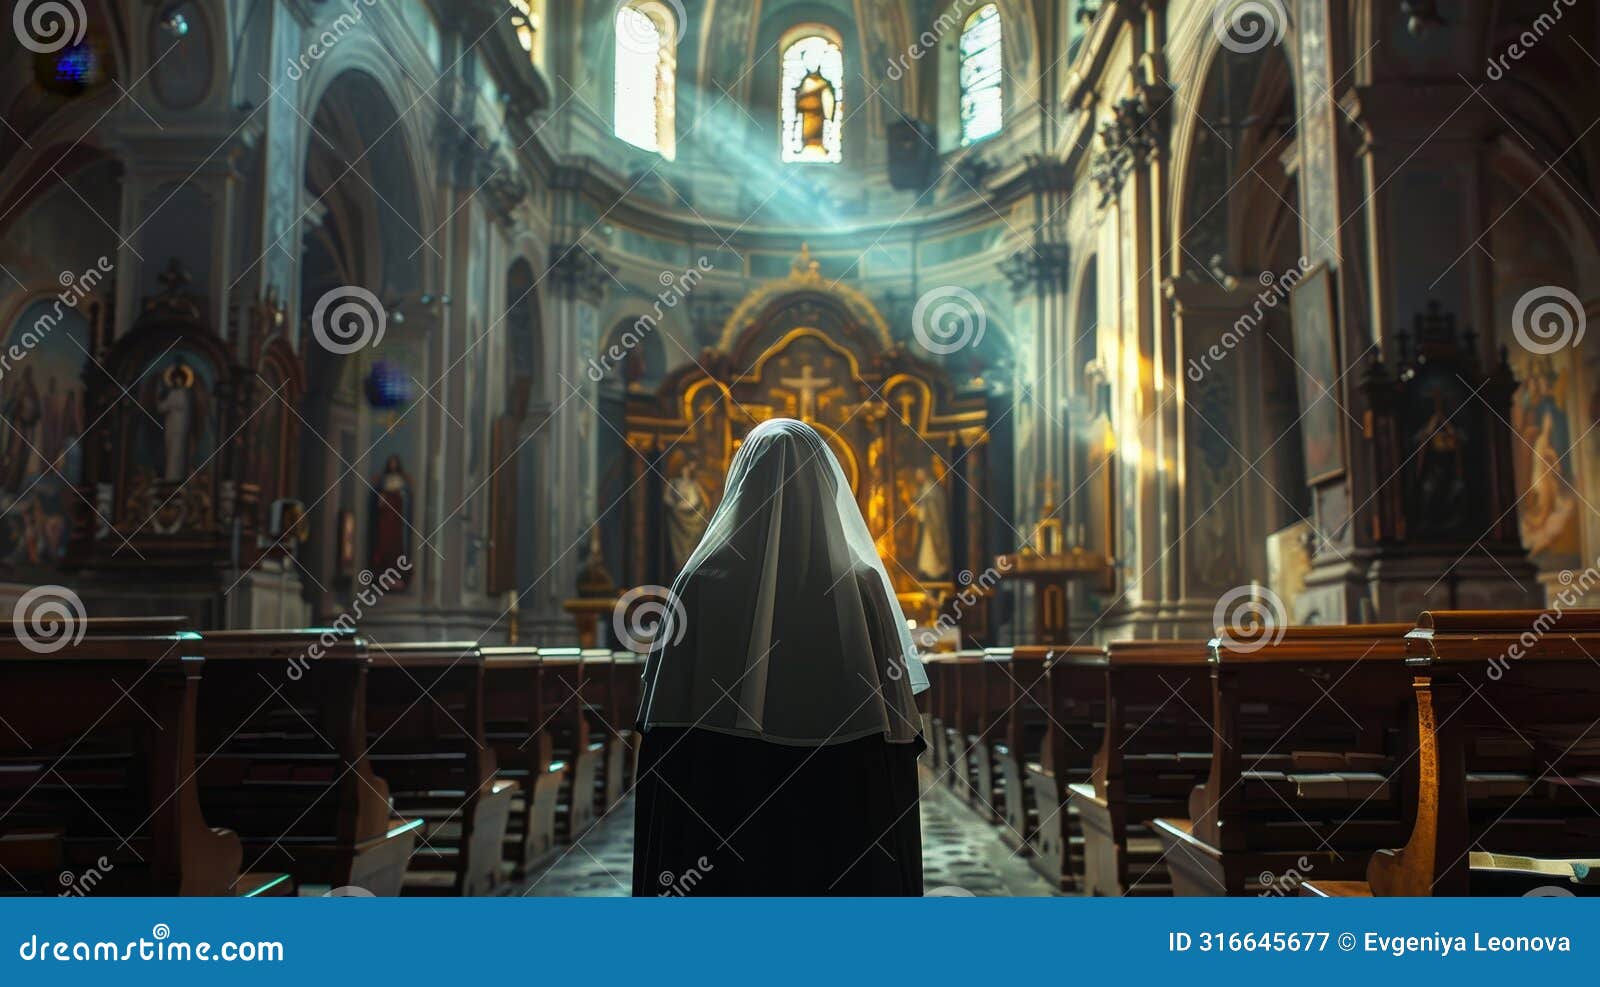 rear view of a nun inside the grandeur of a cathedral, evoking a solemn atmosphere